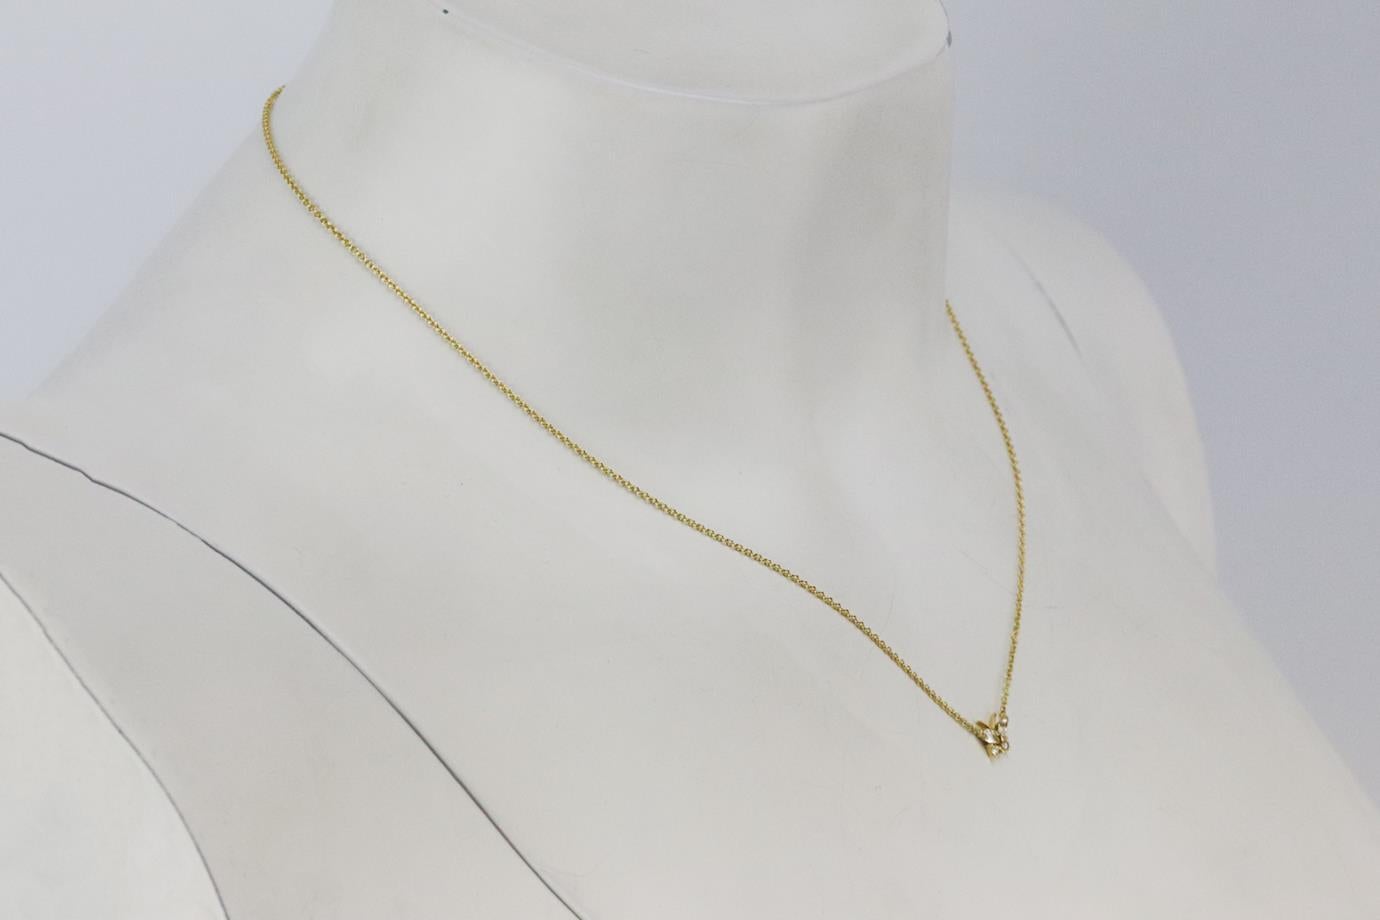 Maria Tash butterfly 18k yellow gold and diamond chain necklace. Made from yellow-gold with diamond butterfly pendant and small chain. Yellow-gold. Lobster clasp fastening at back. Does not come with box or dustbag. Chain Length: 17.4 in. Pendant